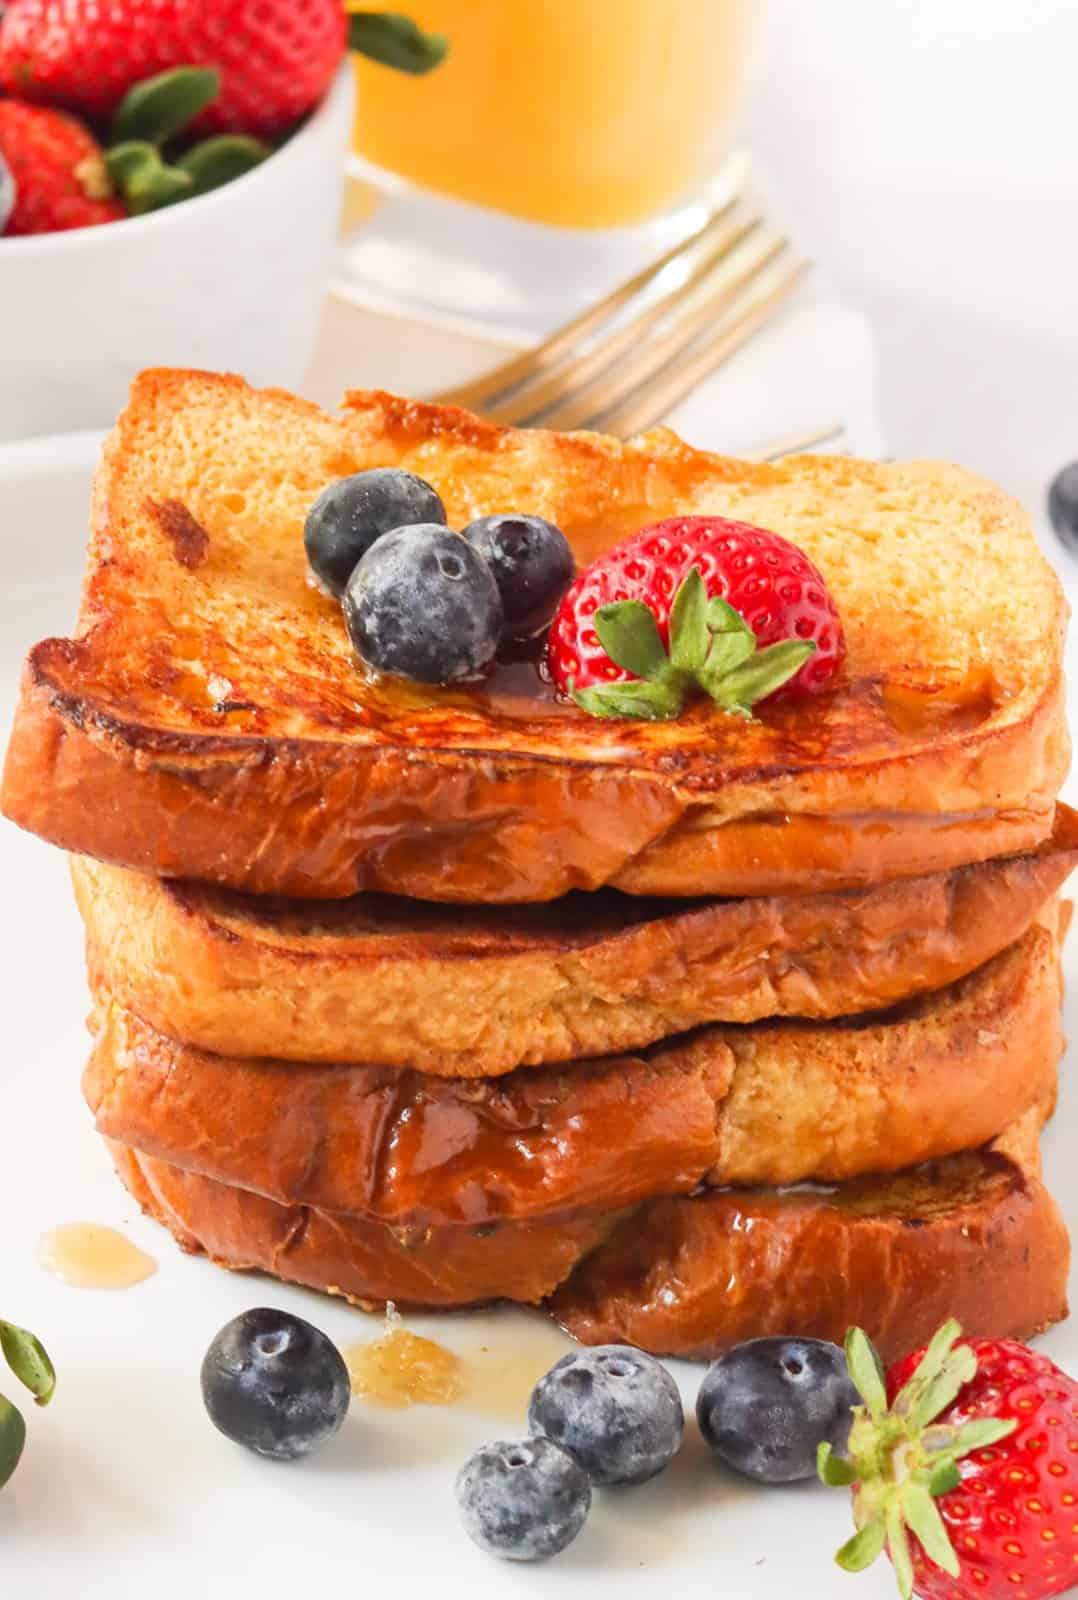 Breakfast is brioche French toast topped with fresh fruit.